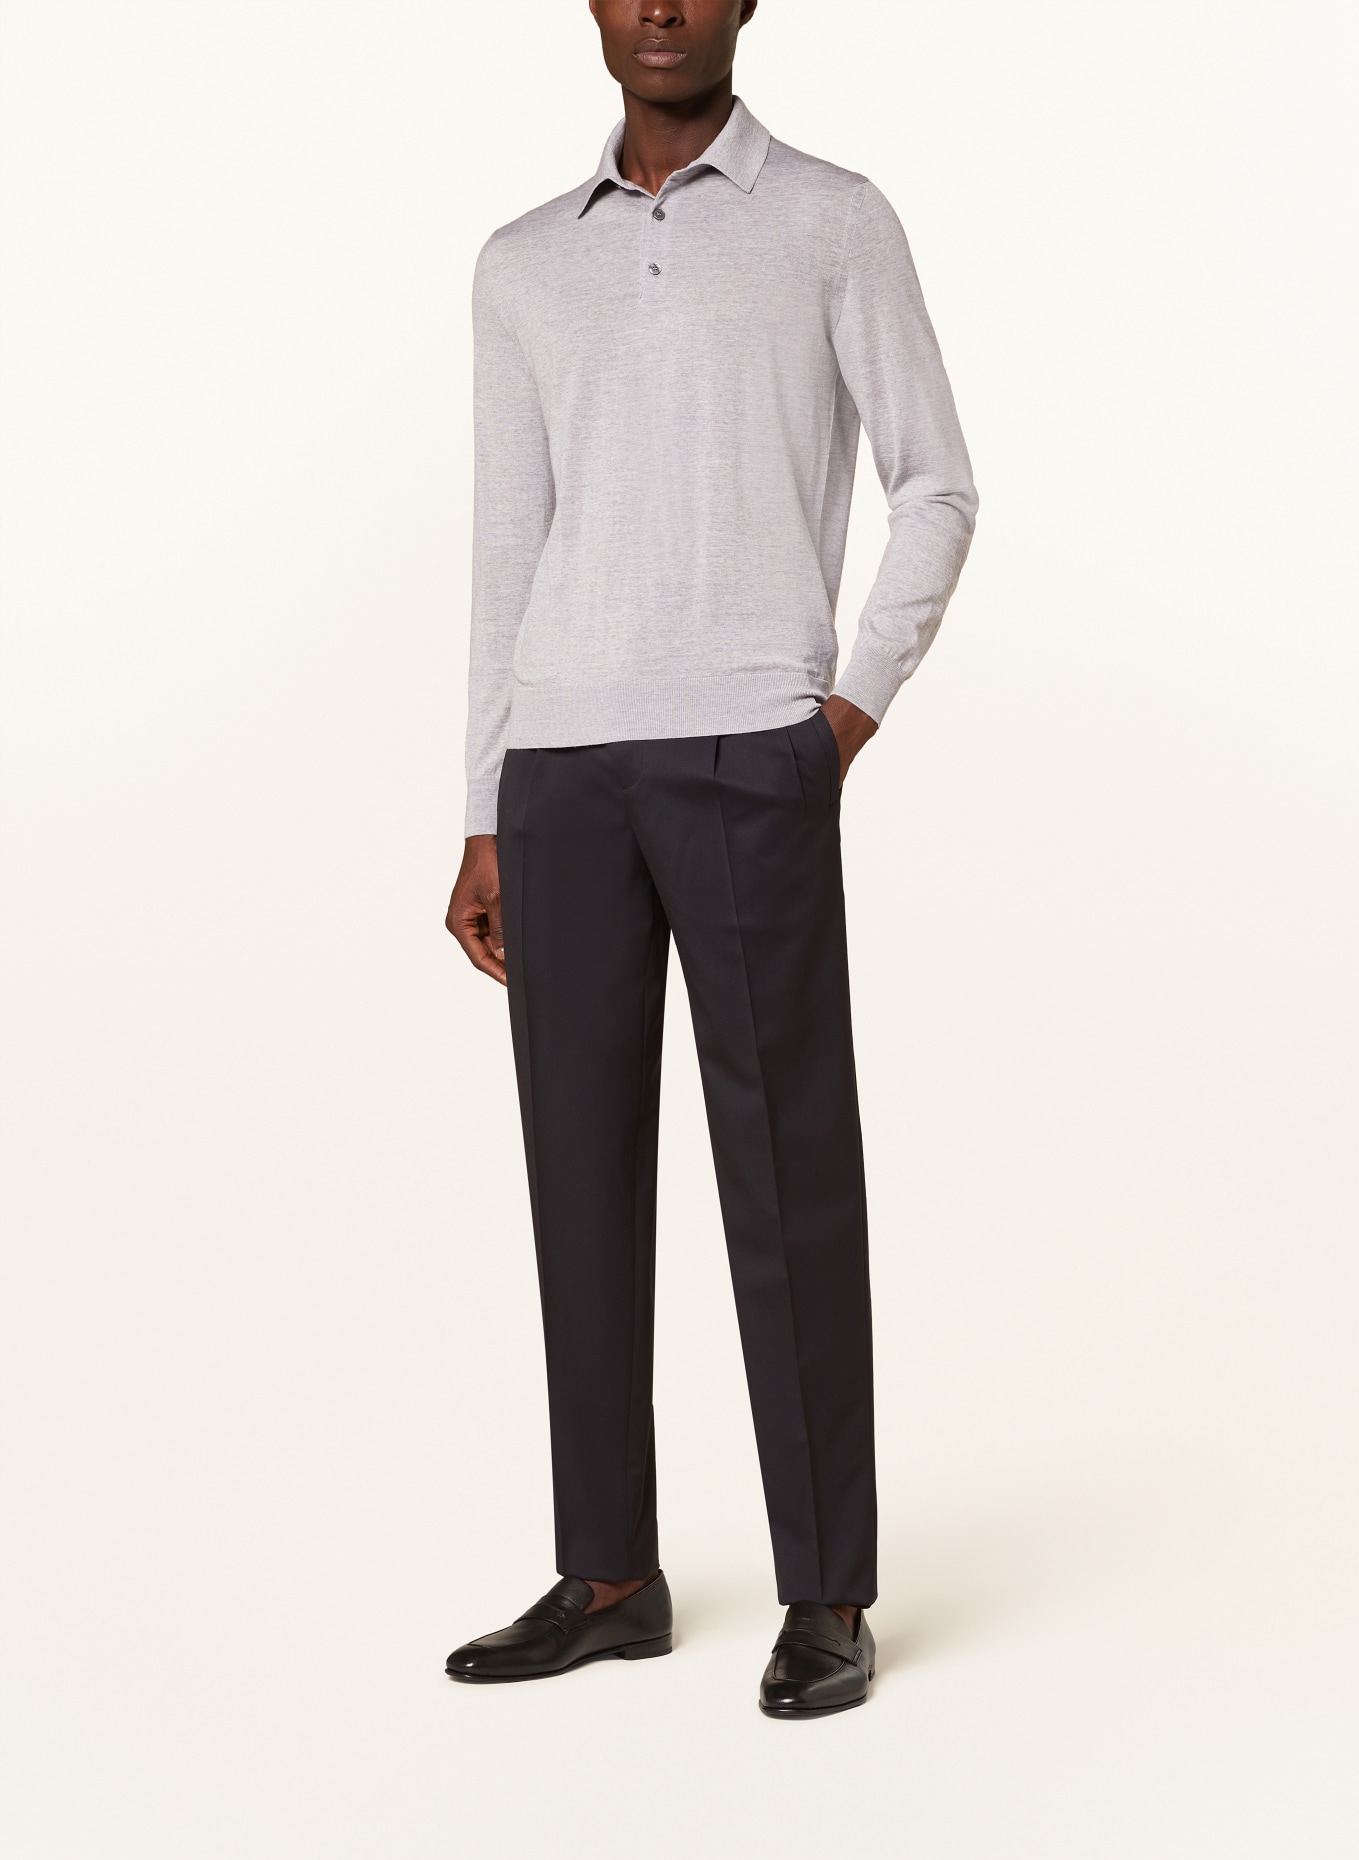 ZEGNA Sweater, Color: LIGHT GRAY (Image 2)